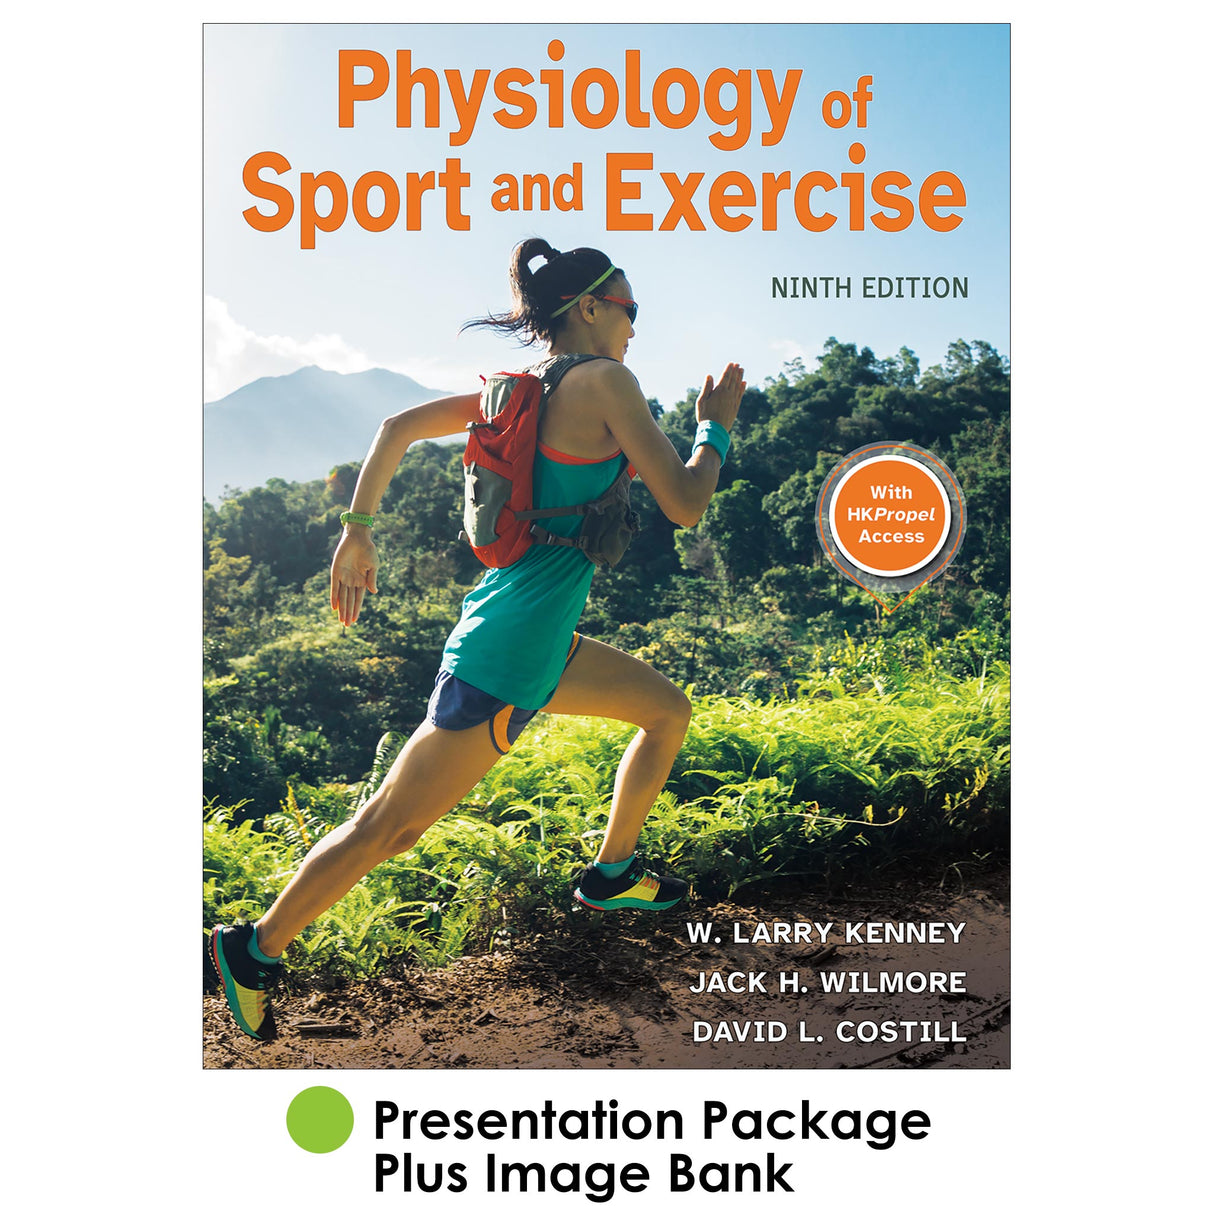 Physiology of Sport and Exercise 9th Edition Presentation Package Plus Image Bank